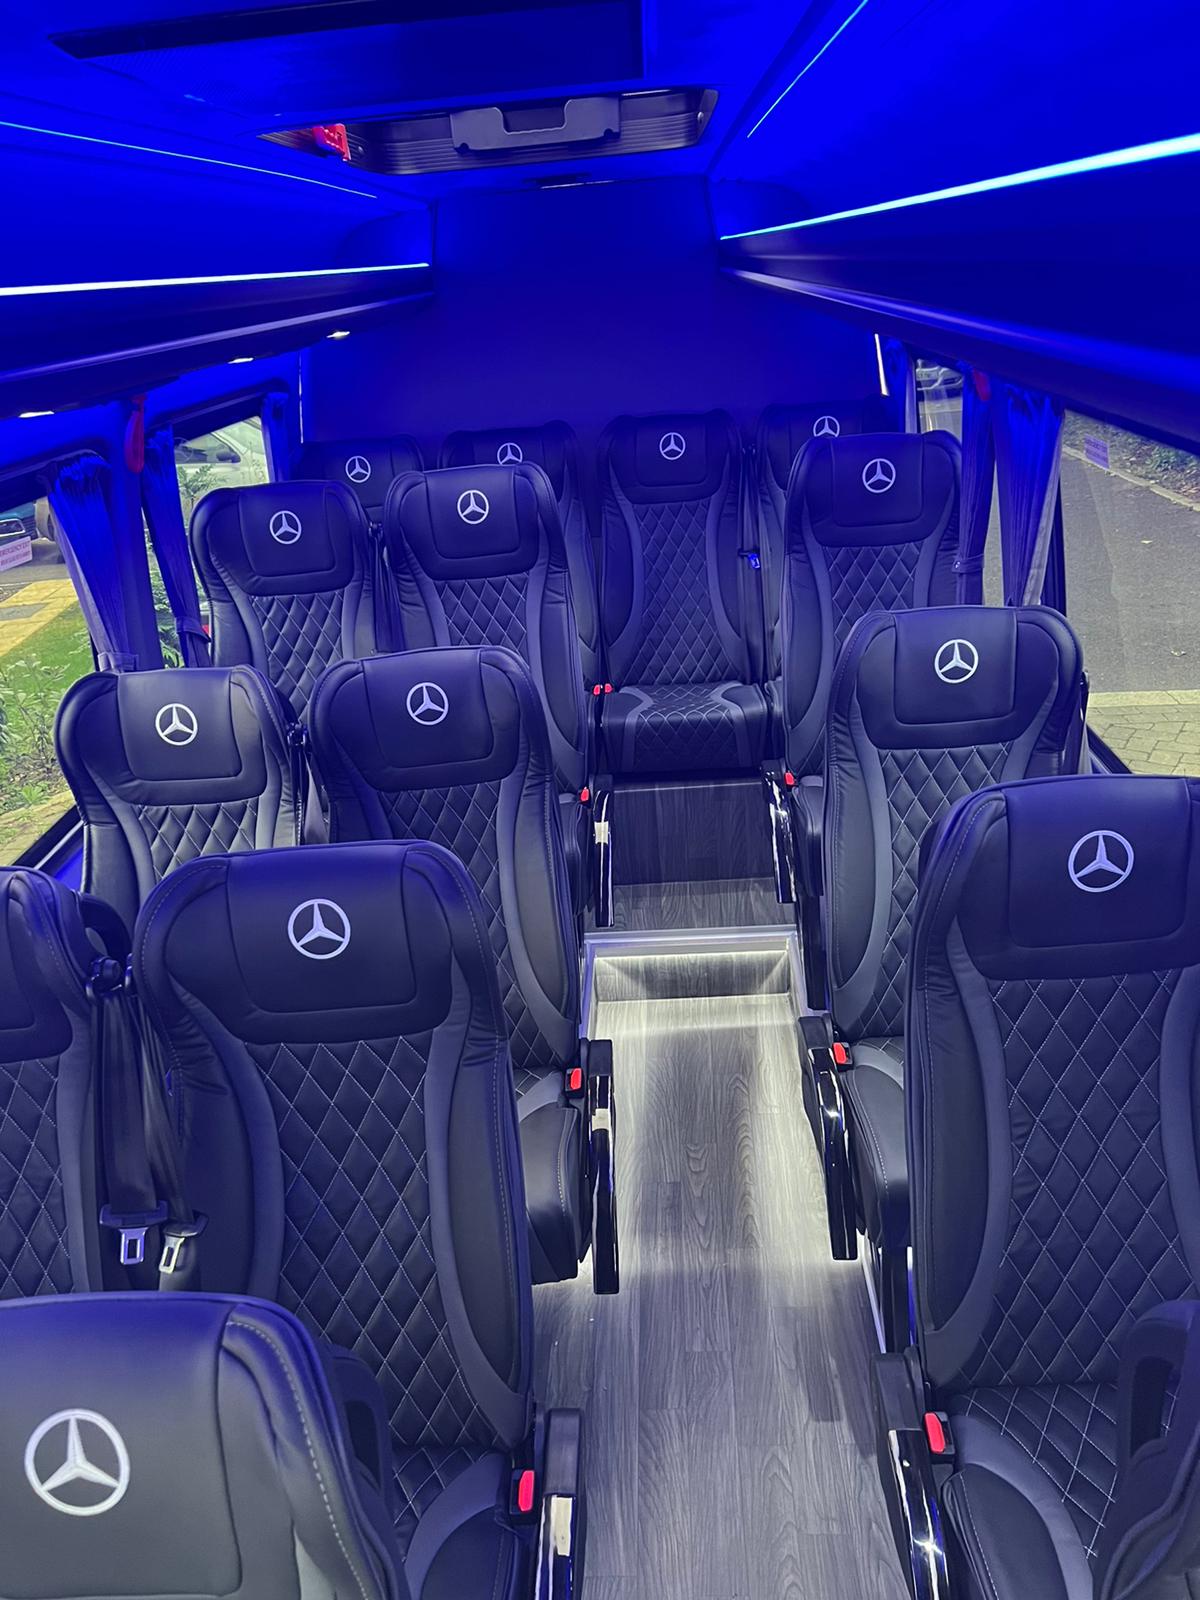 Minibus Hire for the EFL Championship play-offs in Wembley